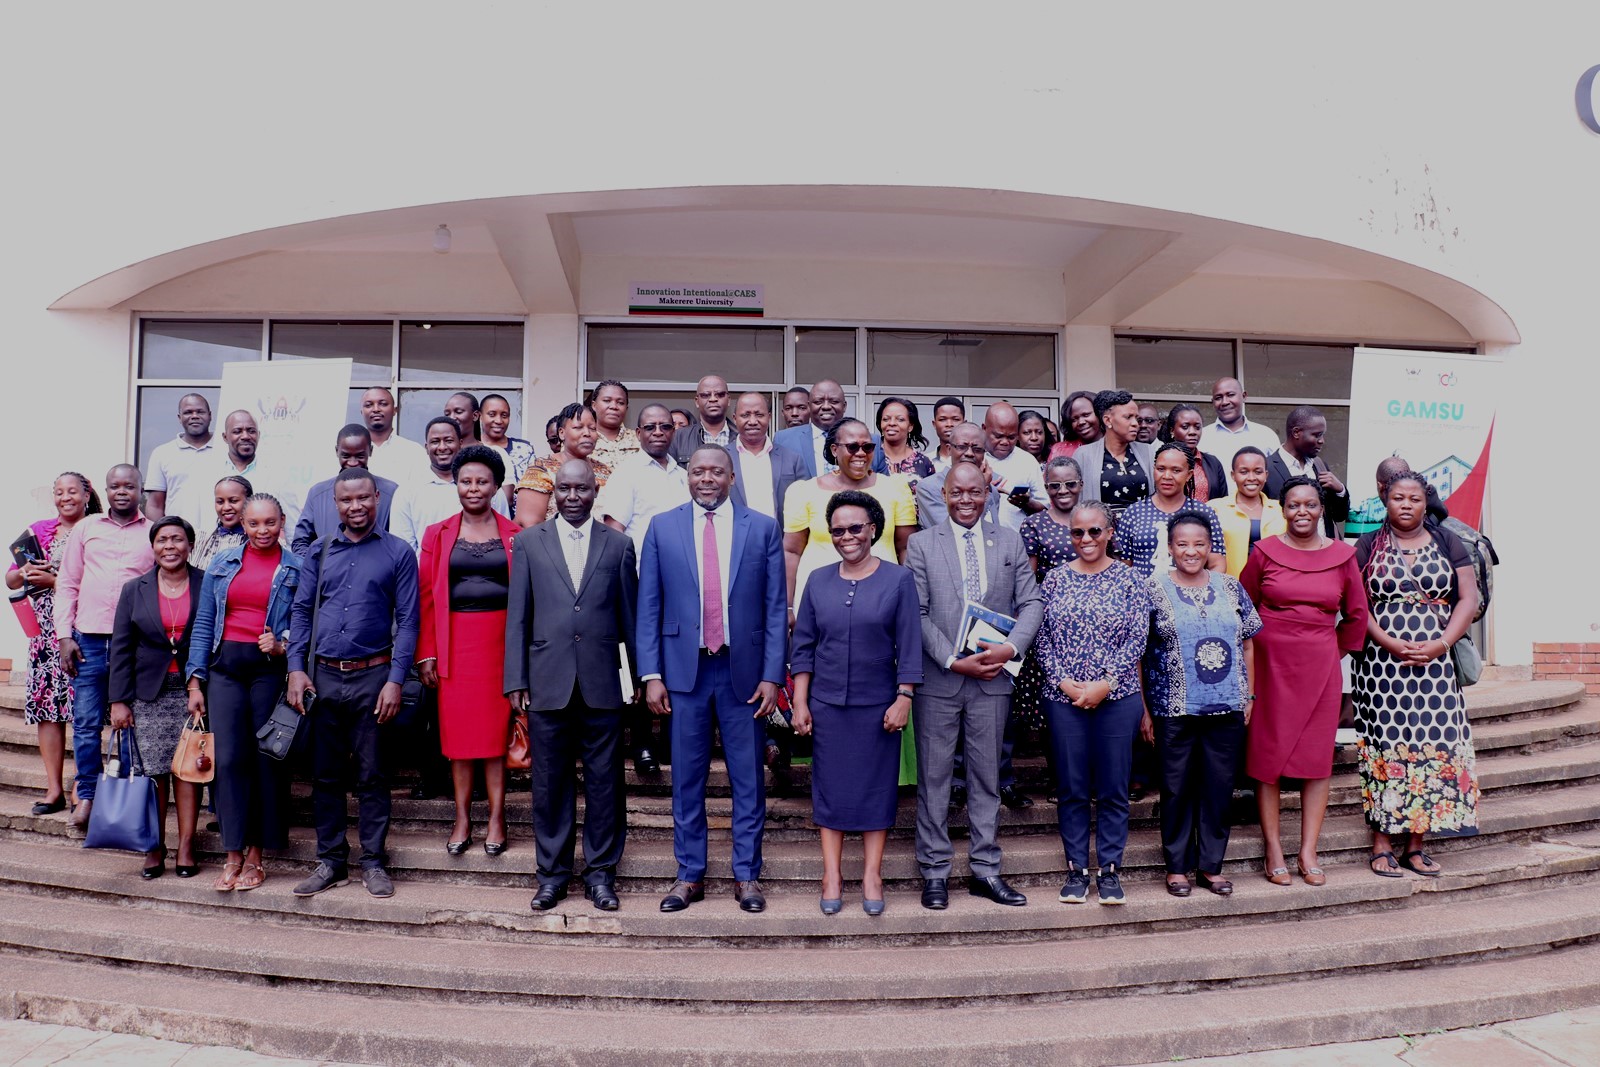 The University Secretary – Mr. Yusuf Kiranda (7th right), Head GAMSU – Prof. Sylvia A.N. Nannyonga – Tamusuza (6th right), deputy University Bursar – Mr. Lubowa Gyaviira (5th R), Mr. Patrick Akonyet (8th Right) and other officials posing for a photo moment with the Principal Investigators (PIs) and Project Administrators at the GAMSU workshop on September 14, 2023, Makerere University. 14th September 2023, The Conference Hall, School of Food Technology, Nutrition and Bioengineering, College of Agricultural and Environmental Sciences (CAES), Makerere University, Kampala Uganda, East Africa.